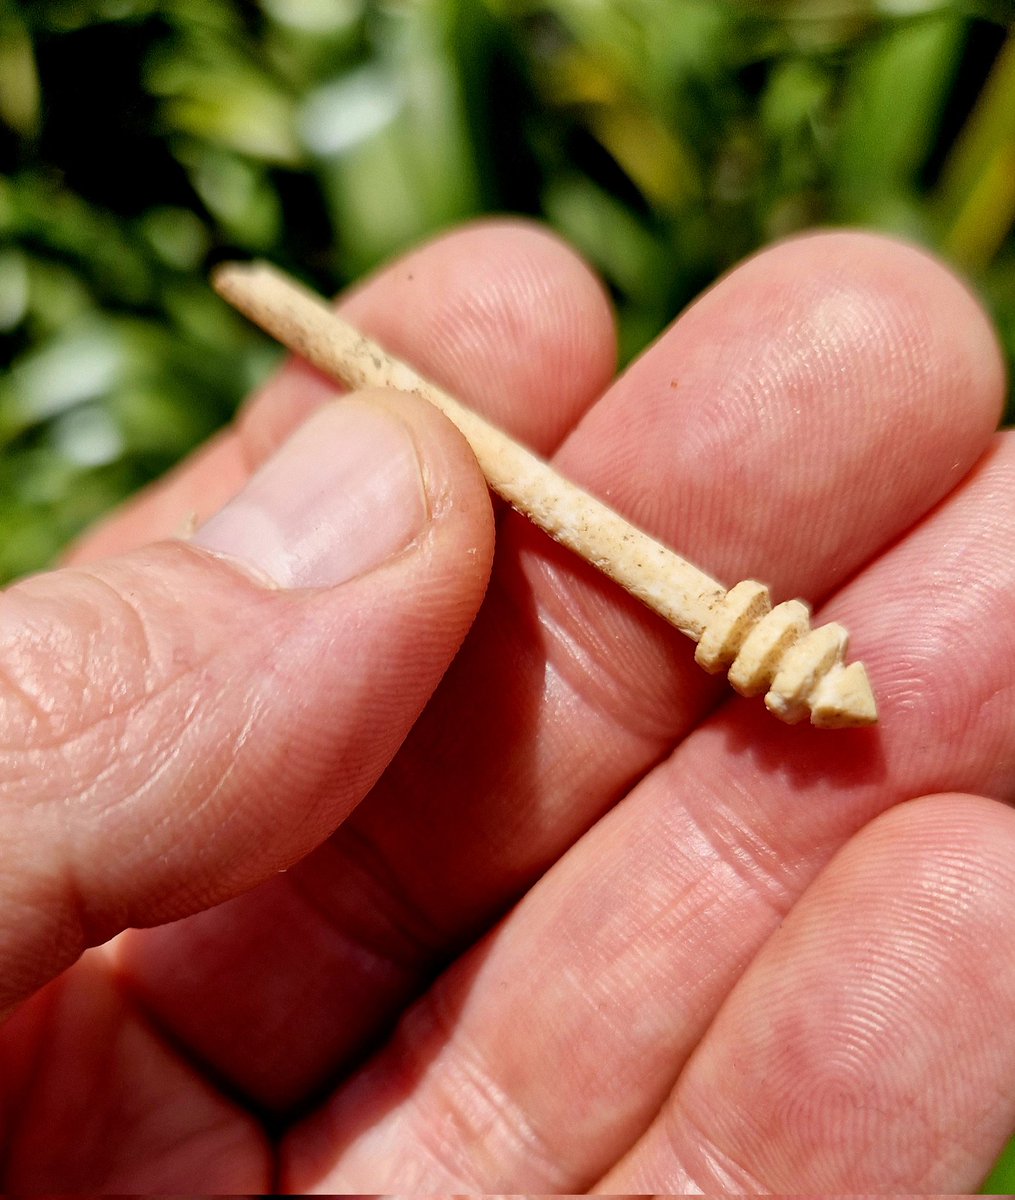 Looking not unlike a modern day honey spoon / dipper / dripper / drizzler / stick / wand, this delicately worked Late #Roman hair pin, carved from animal bone, was found in a small pit at Winterborne Kingston #Dorset

📷 2013

#FindsFriday